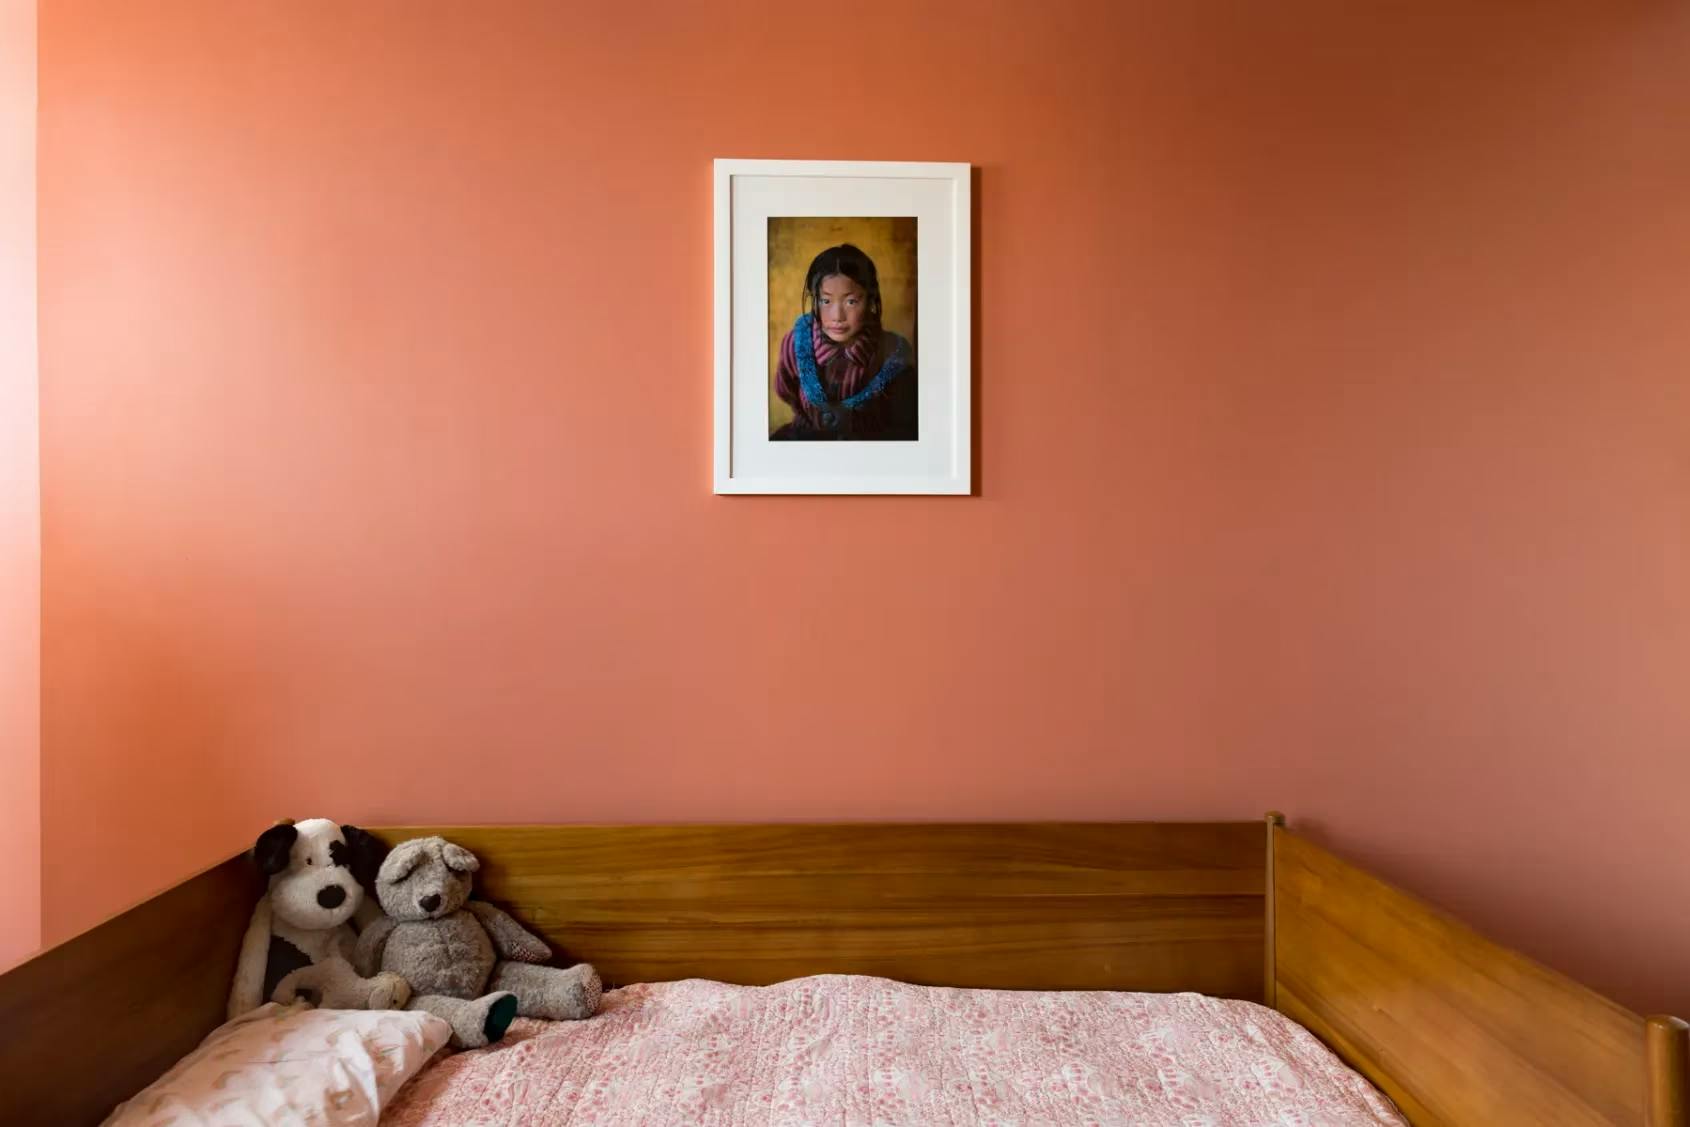 Red Earth by Farrow & Ball, featured in Apartment Therapy, Photo by Minette Hand